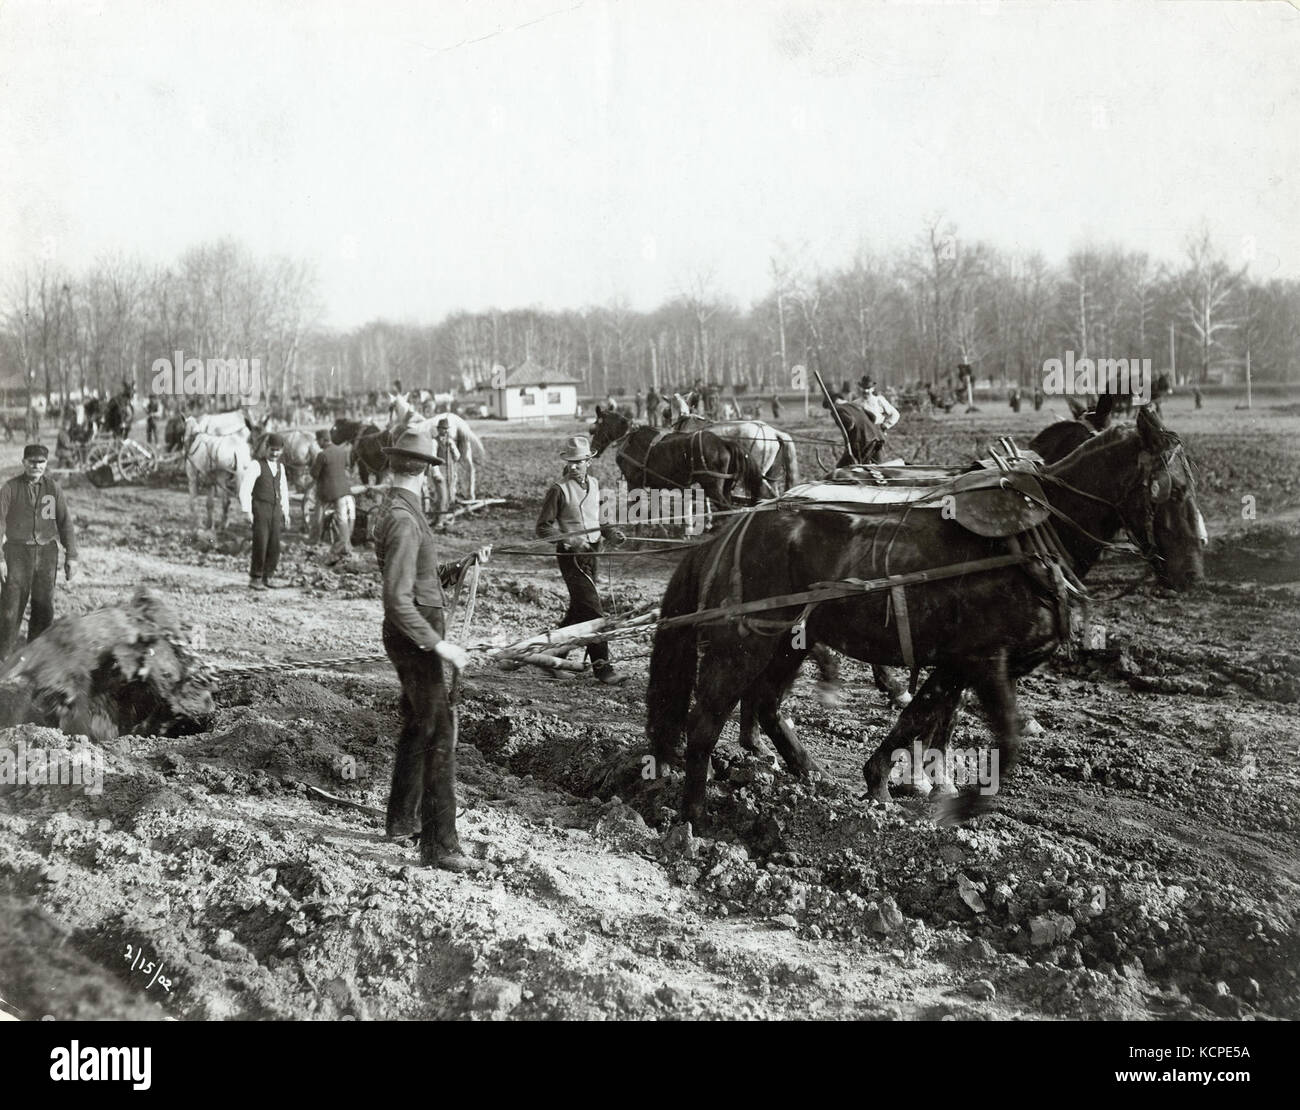 Draft horse pulling a stump during the excavation for the River des Peres in Forest Park during the construction phase of the 1904 World's Fair, 15 February 1902 Stock Photo